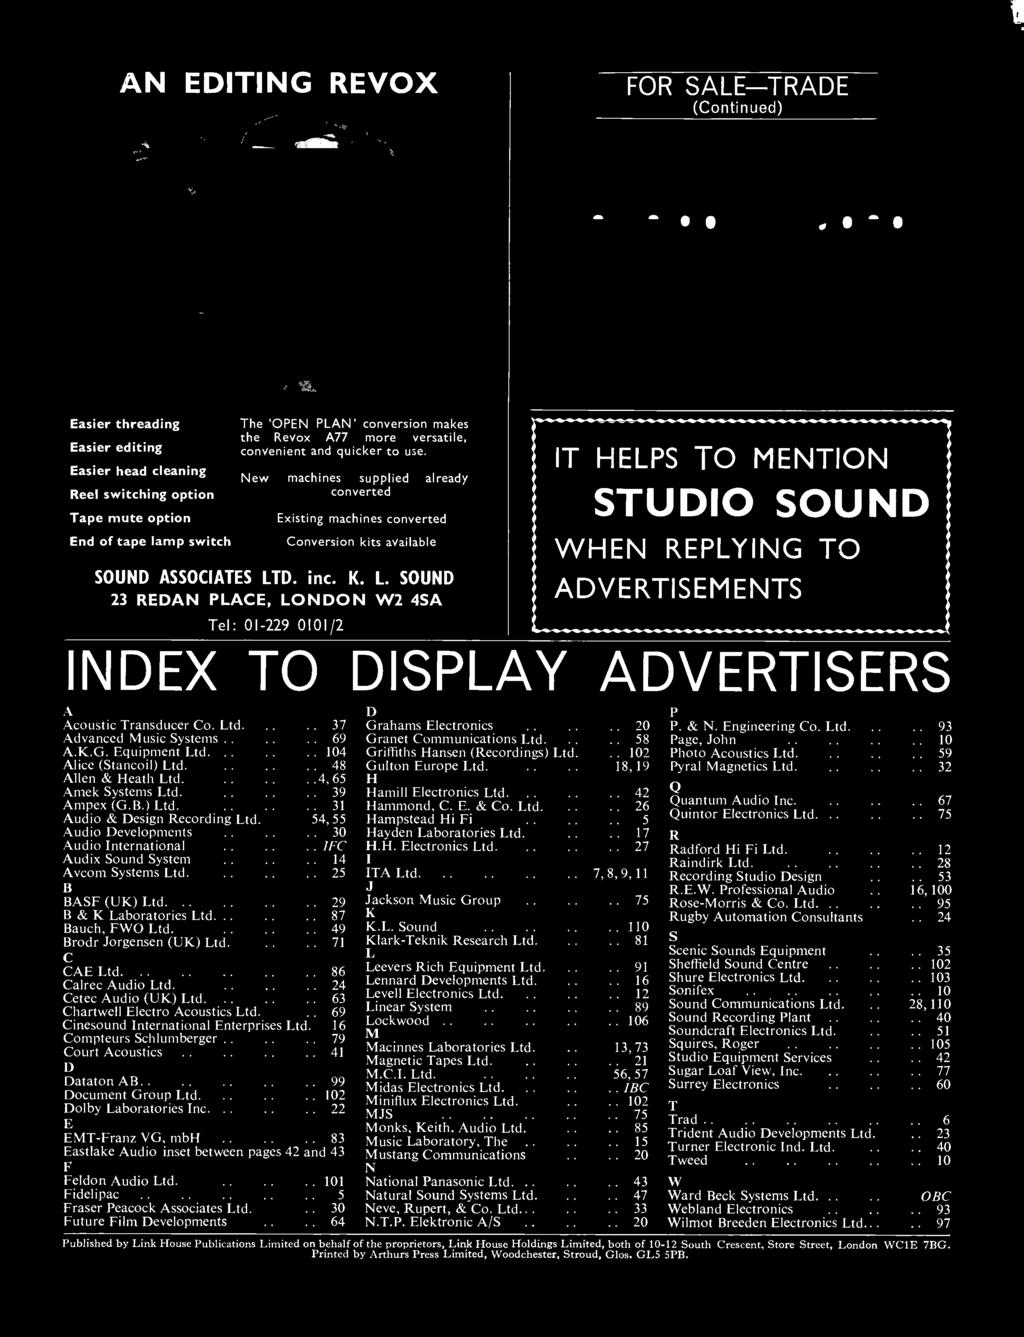 D. inc. K. L. SOUND 23 REDAN PLACE, LONDON W2 4SA Tel: 01-229 0101/2 IT HELPS TO MENTION STUDIO SOUND WHEN REPLYING TO ADVERTISEMENTS INDEX TO DISPLAY ADVERTISERS A Acoustic Transducer Co. Ltd.